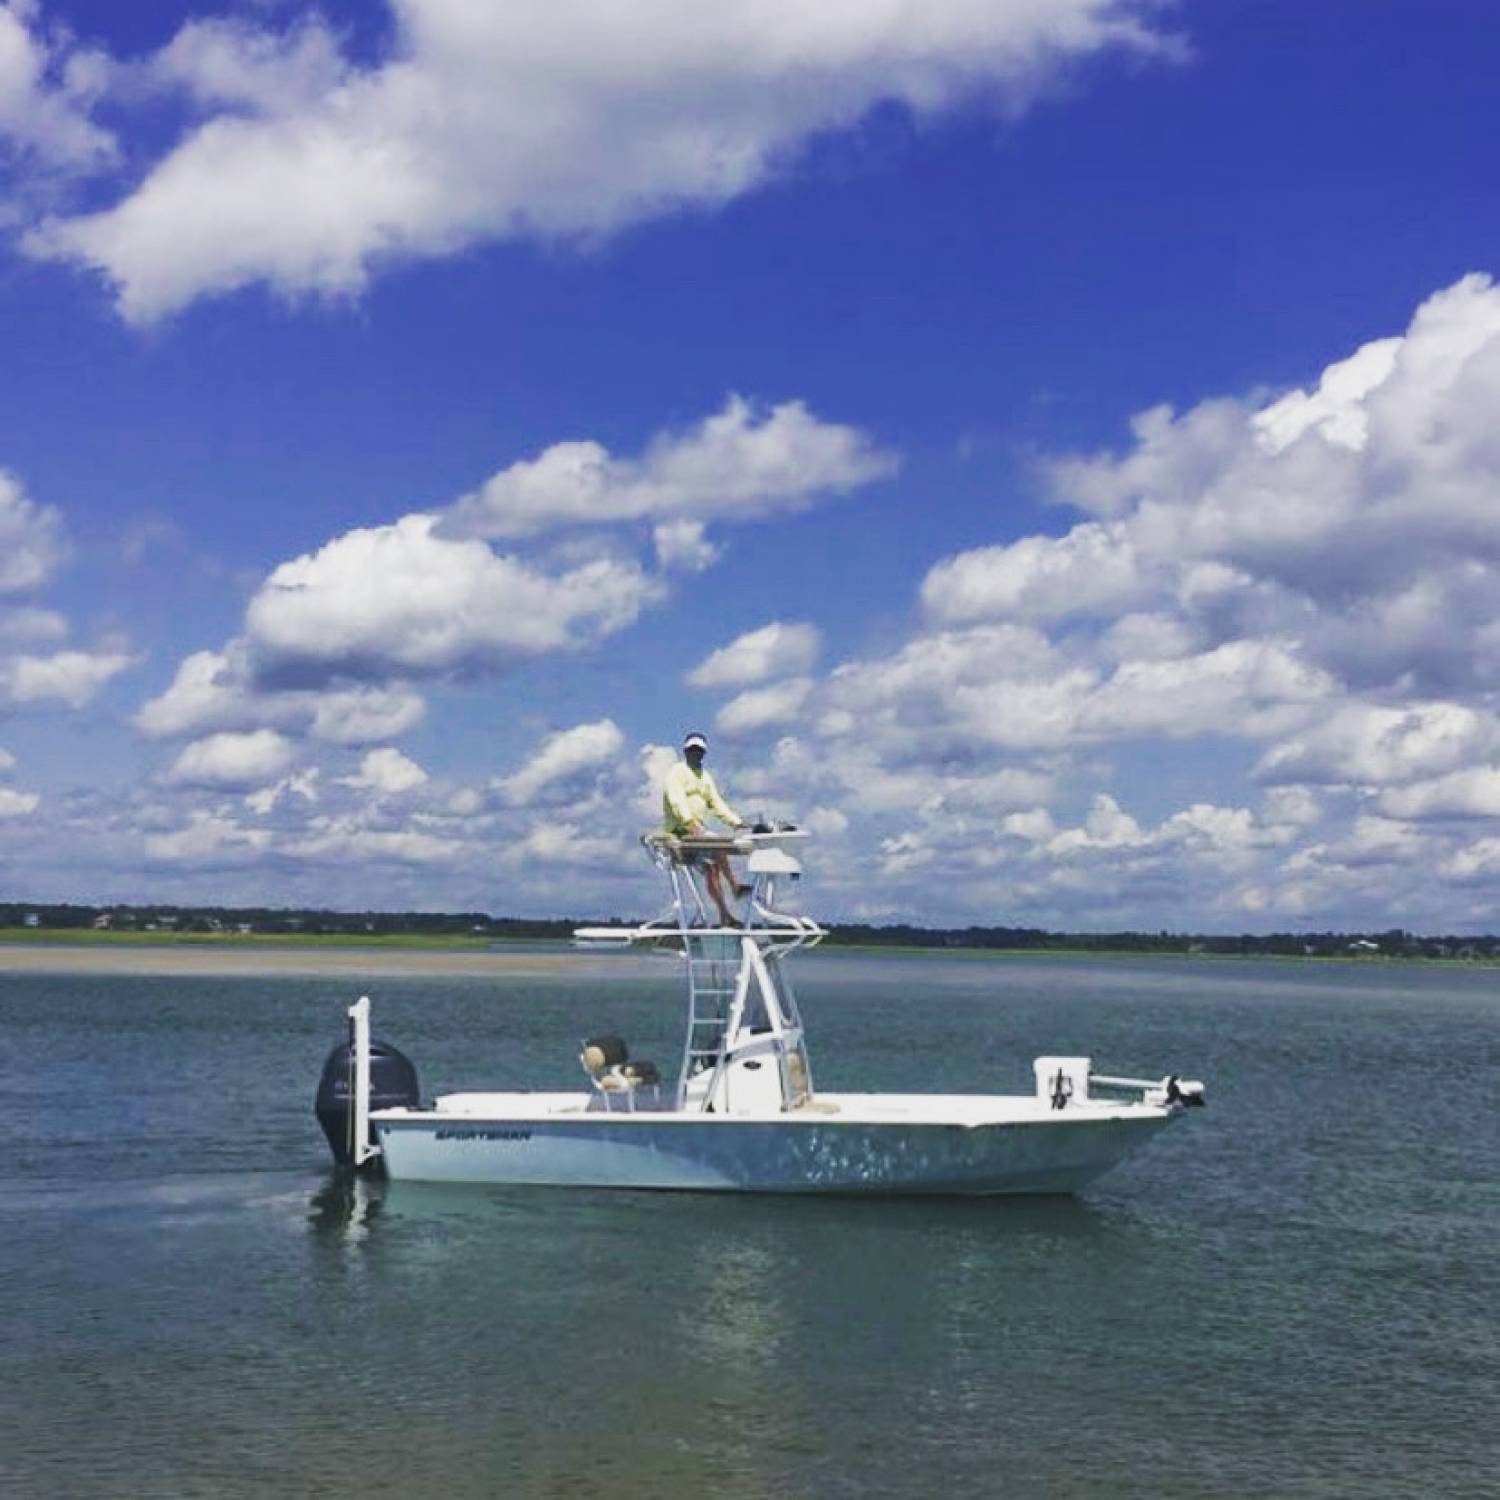 Darrell proud on his tower ready to fish.  This photo was taken from Lea Island, NC in August 2018 shortly...